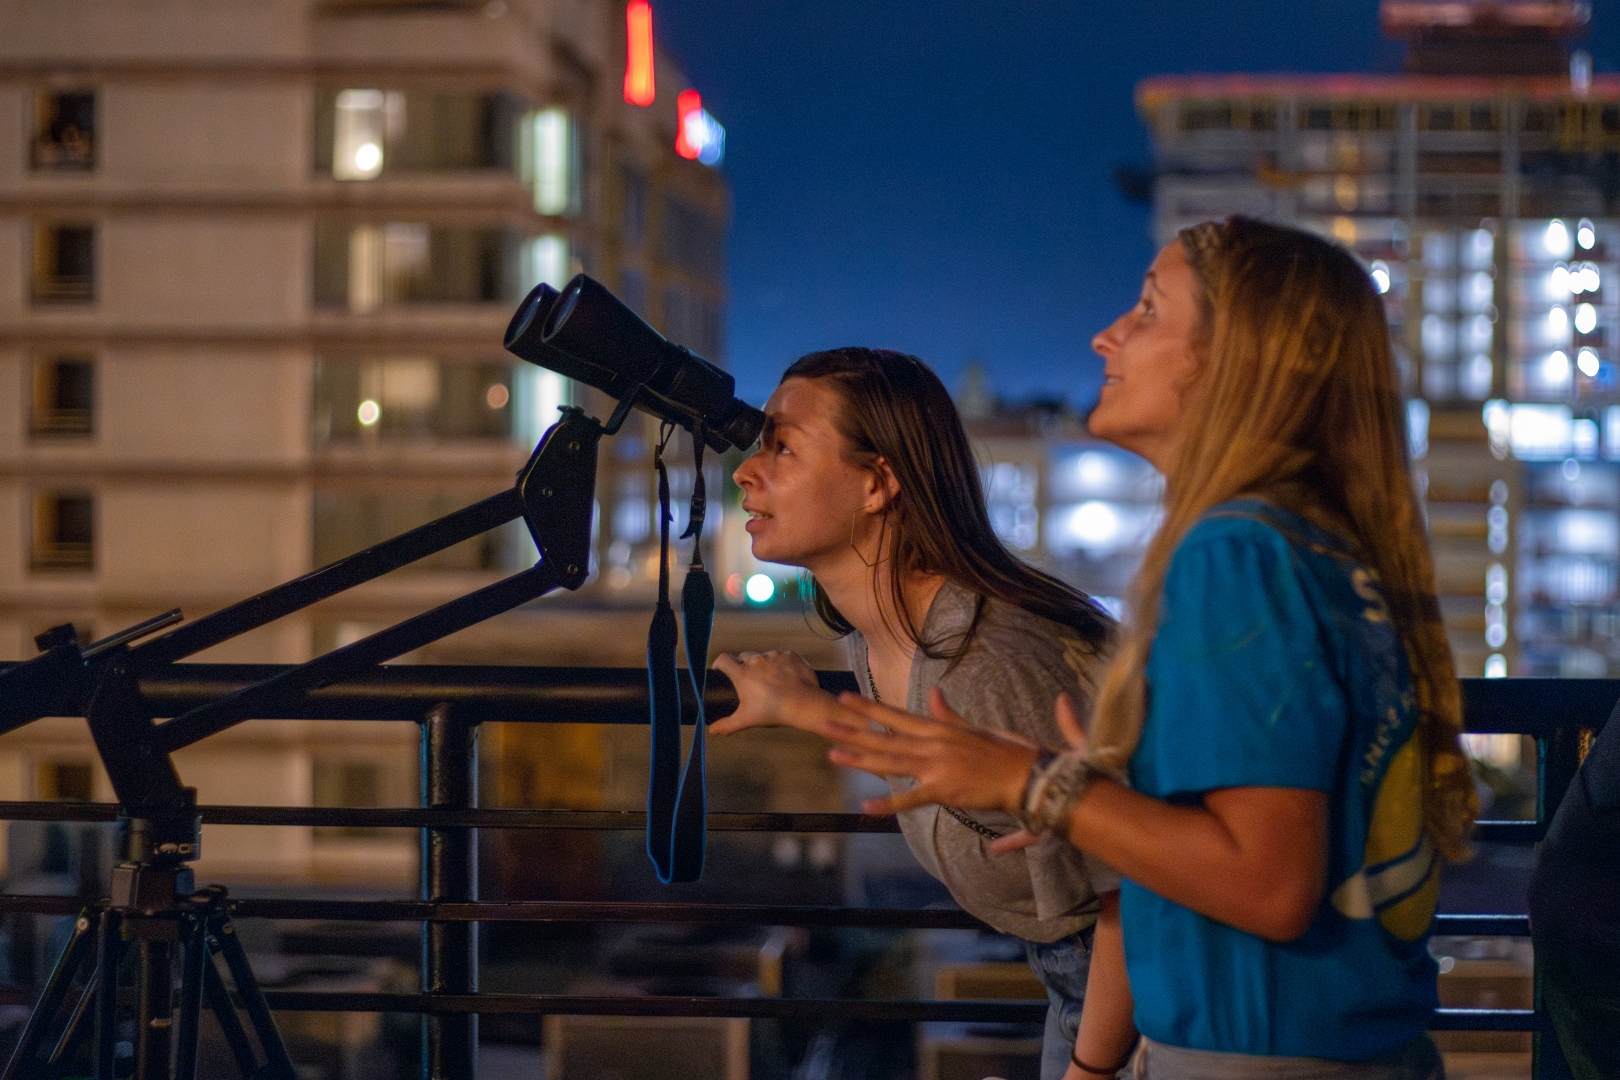 A Morehead educator speaks with a guest looking through binoculars. In the background is the Durham skyline.